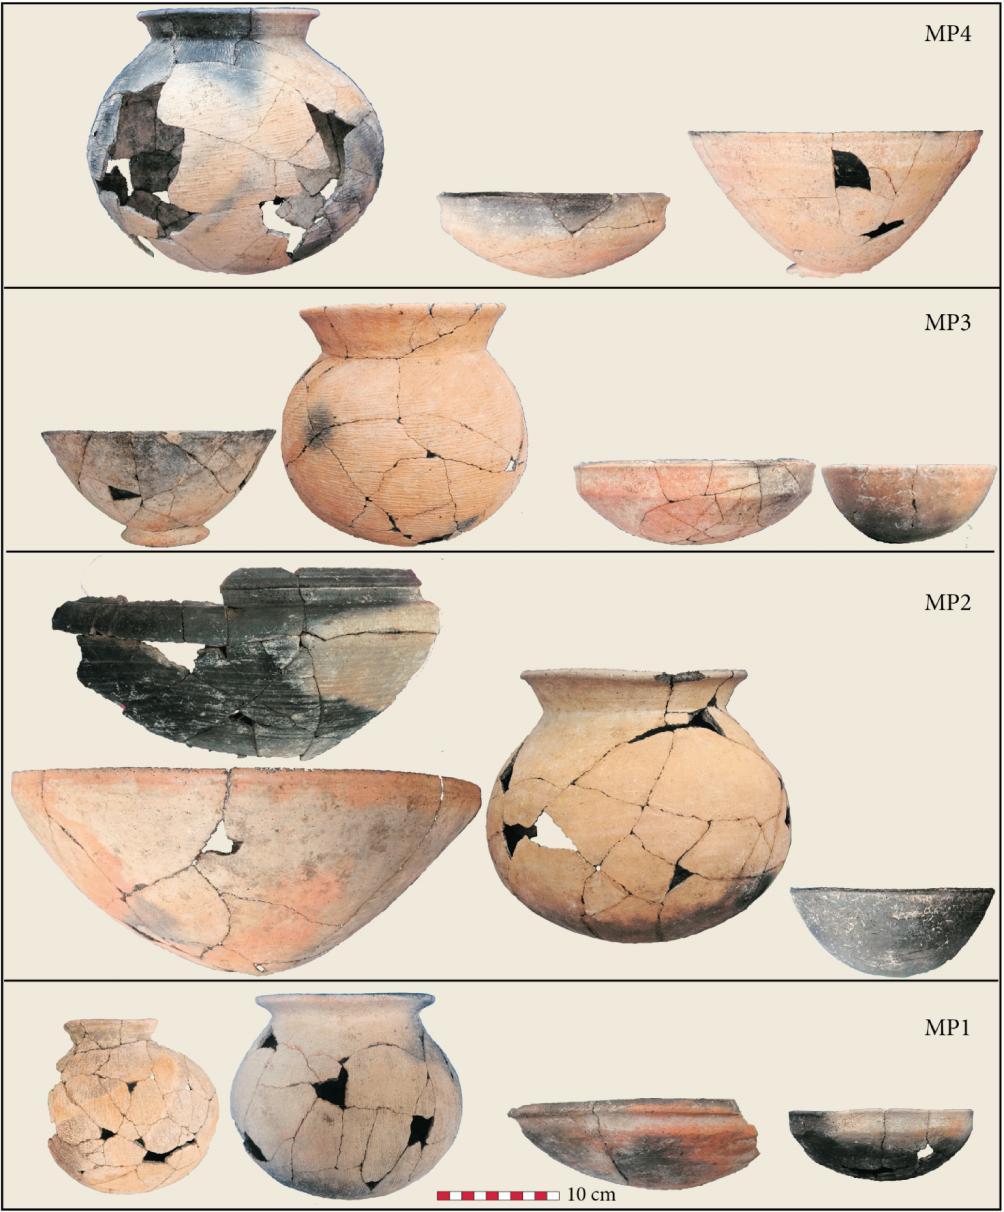 HIGHAM ET AL.: THE EXCAVATION OF NON BAN JAK, NORTHEAST THAILAND - A REPORT ON THE FIRST THREE SEASONS Figure 8: Ceramic vessels from adult burials.